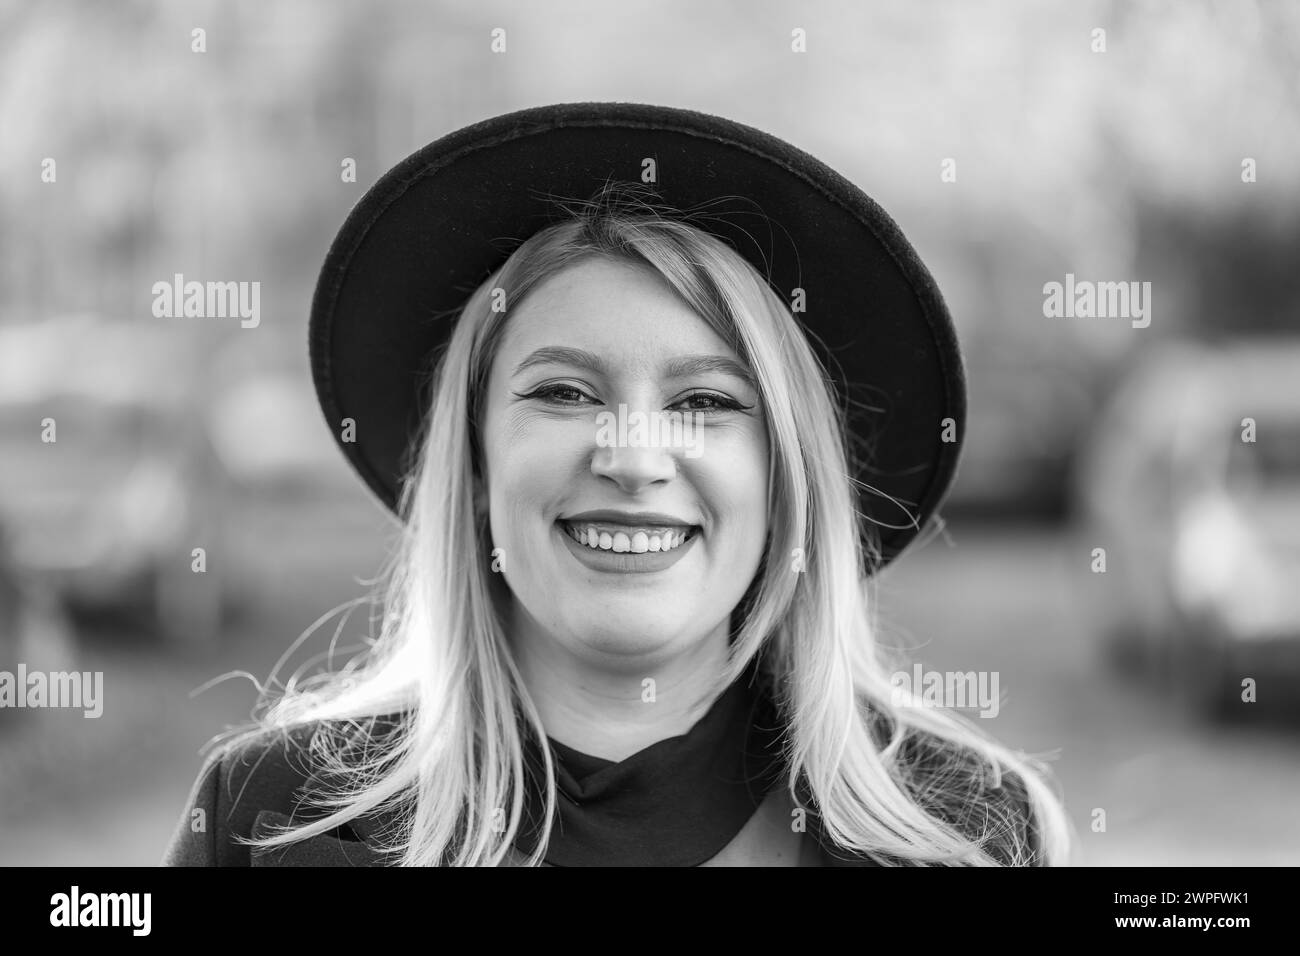 Close-up portrait of a young woman with a black hat. Black and white. Stock Photo